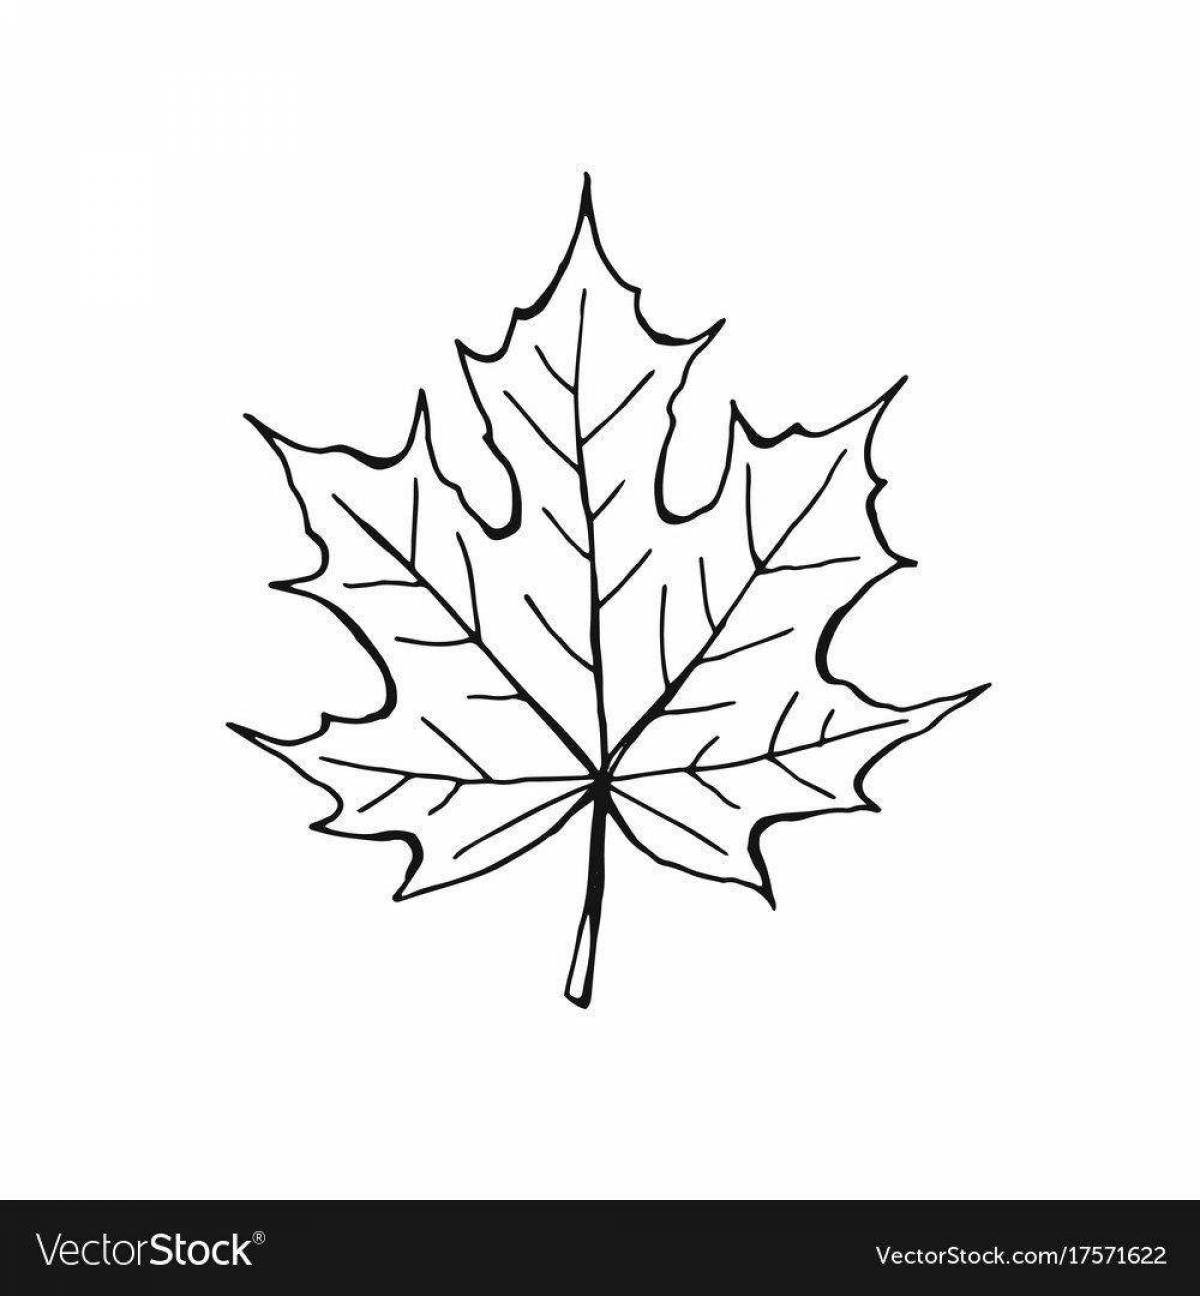 Energy coloring maple leaf for kids